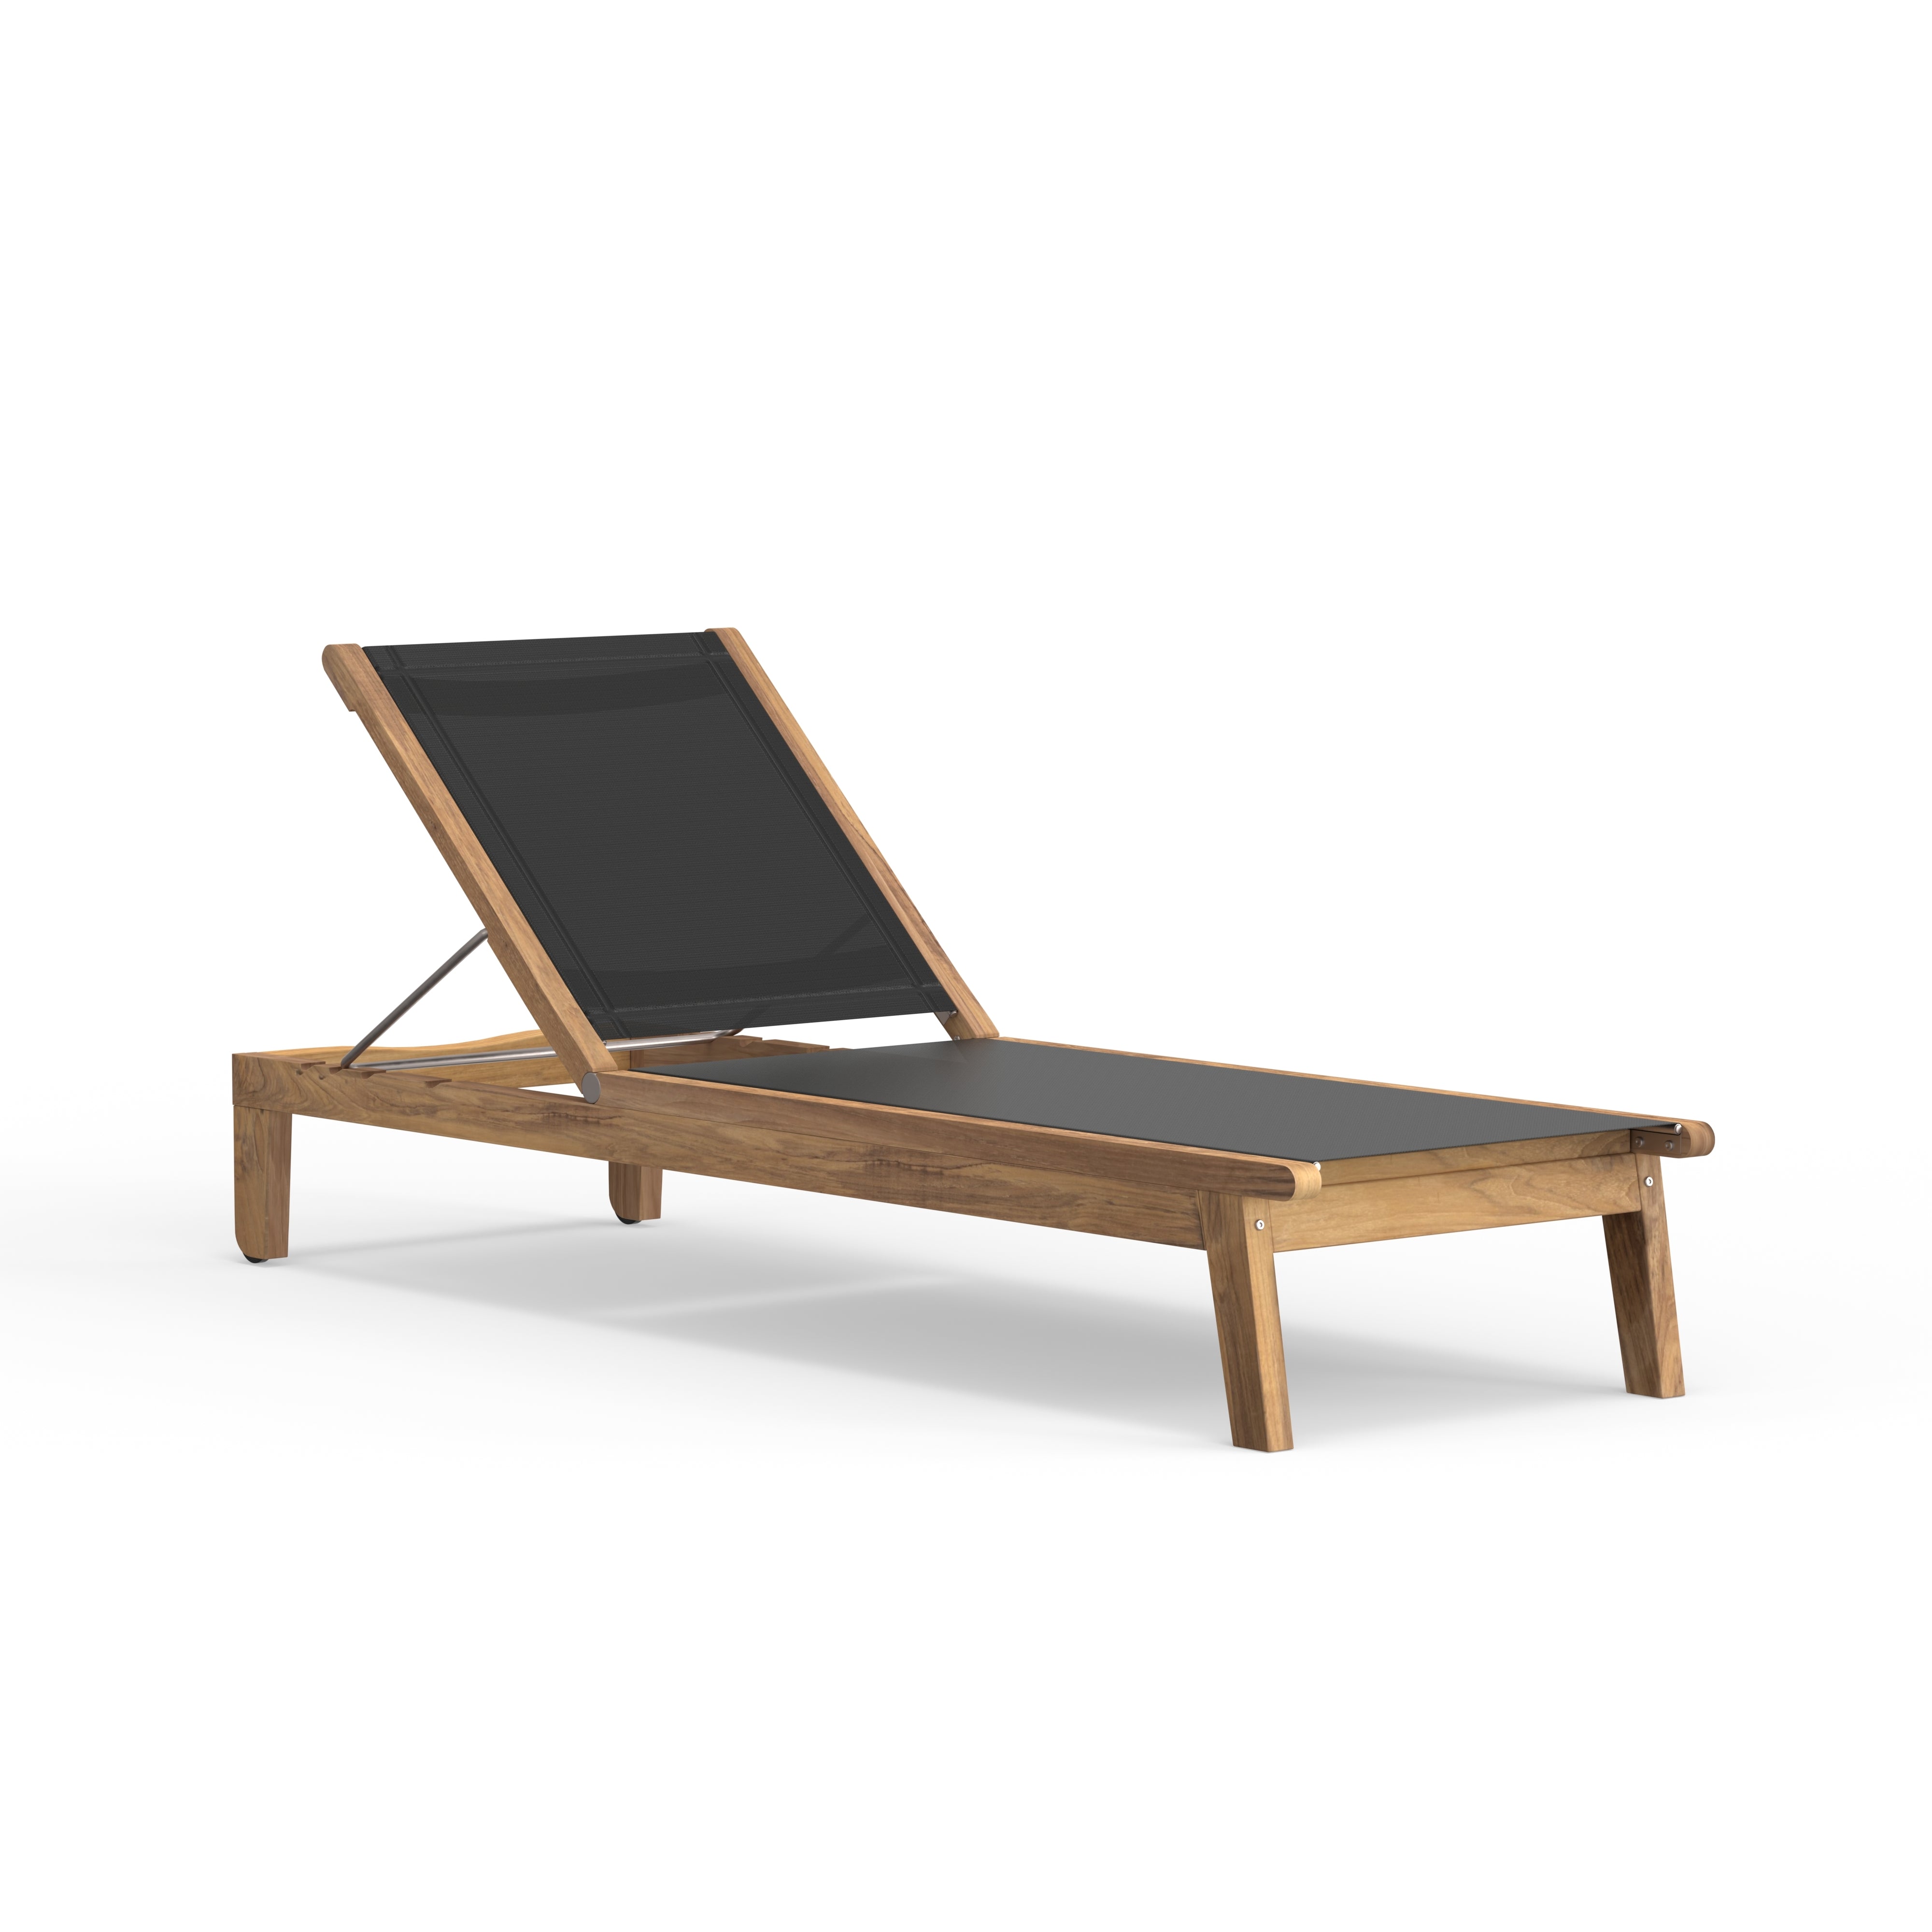 Outdoor Chaise lounge with sling material